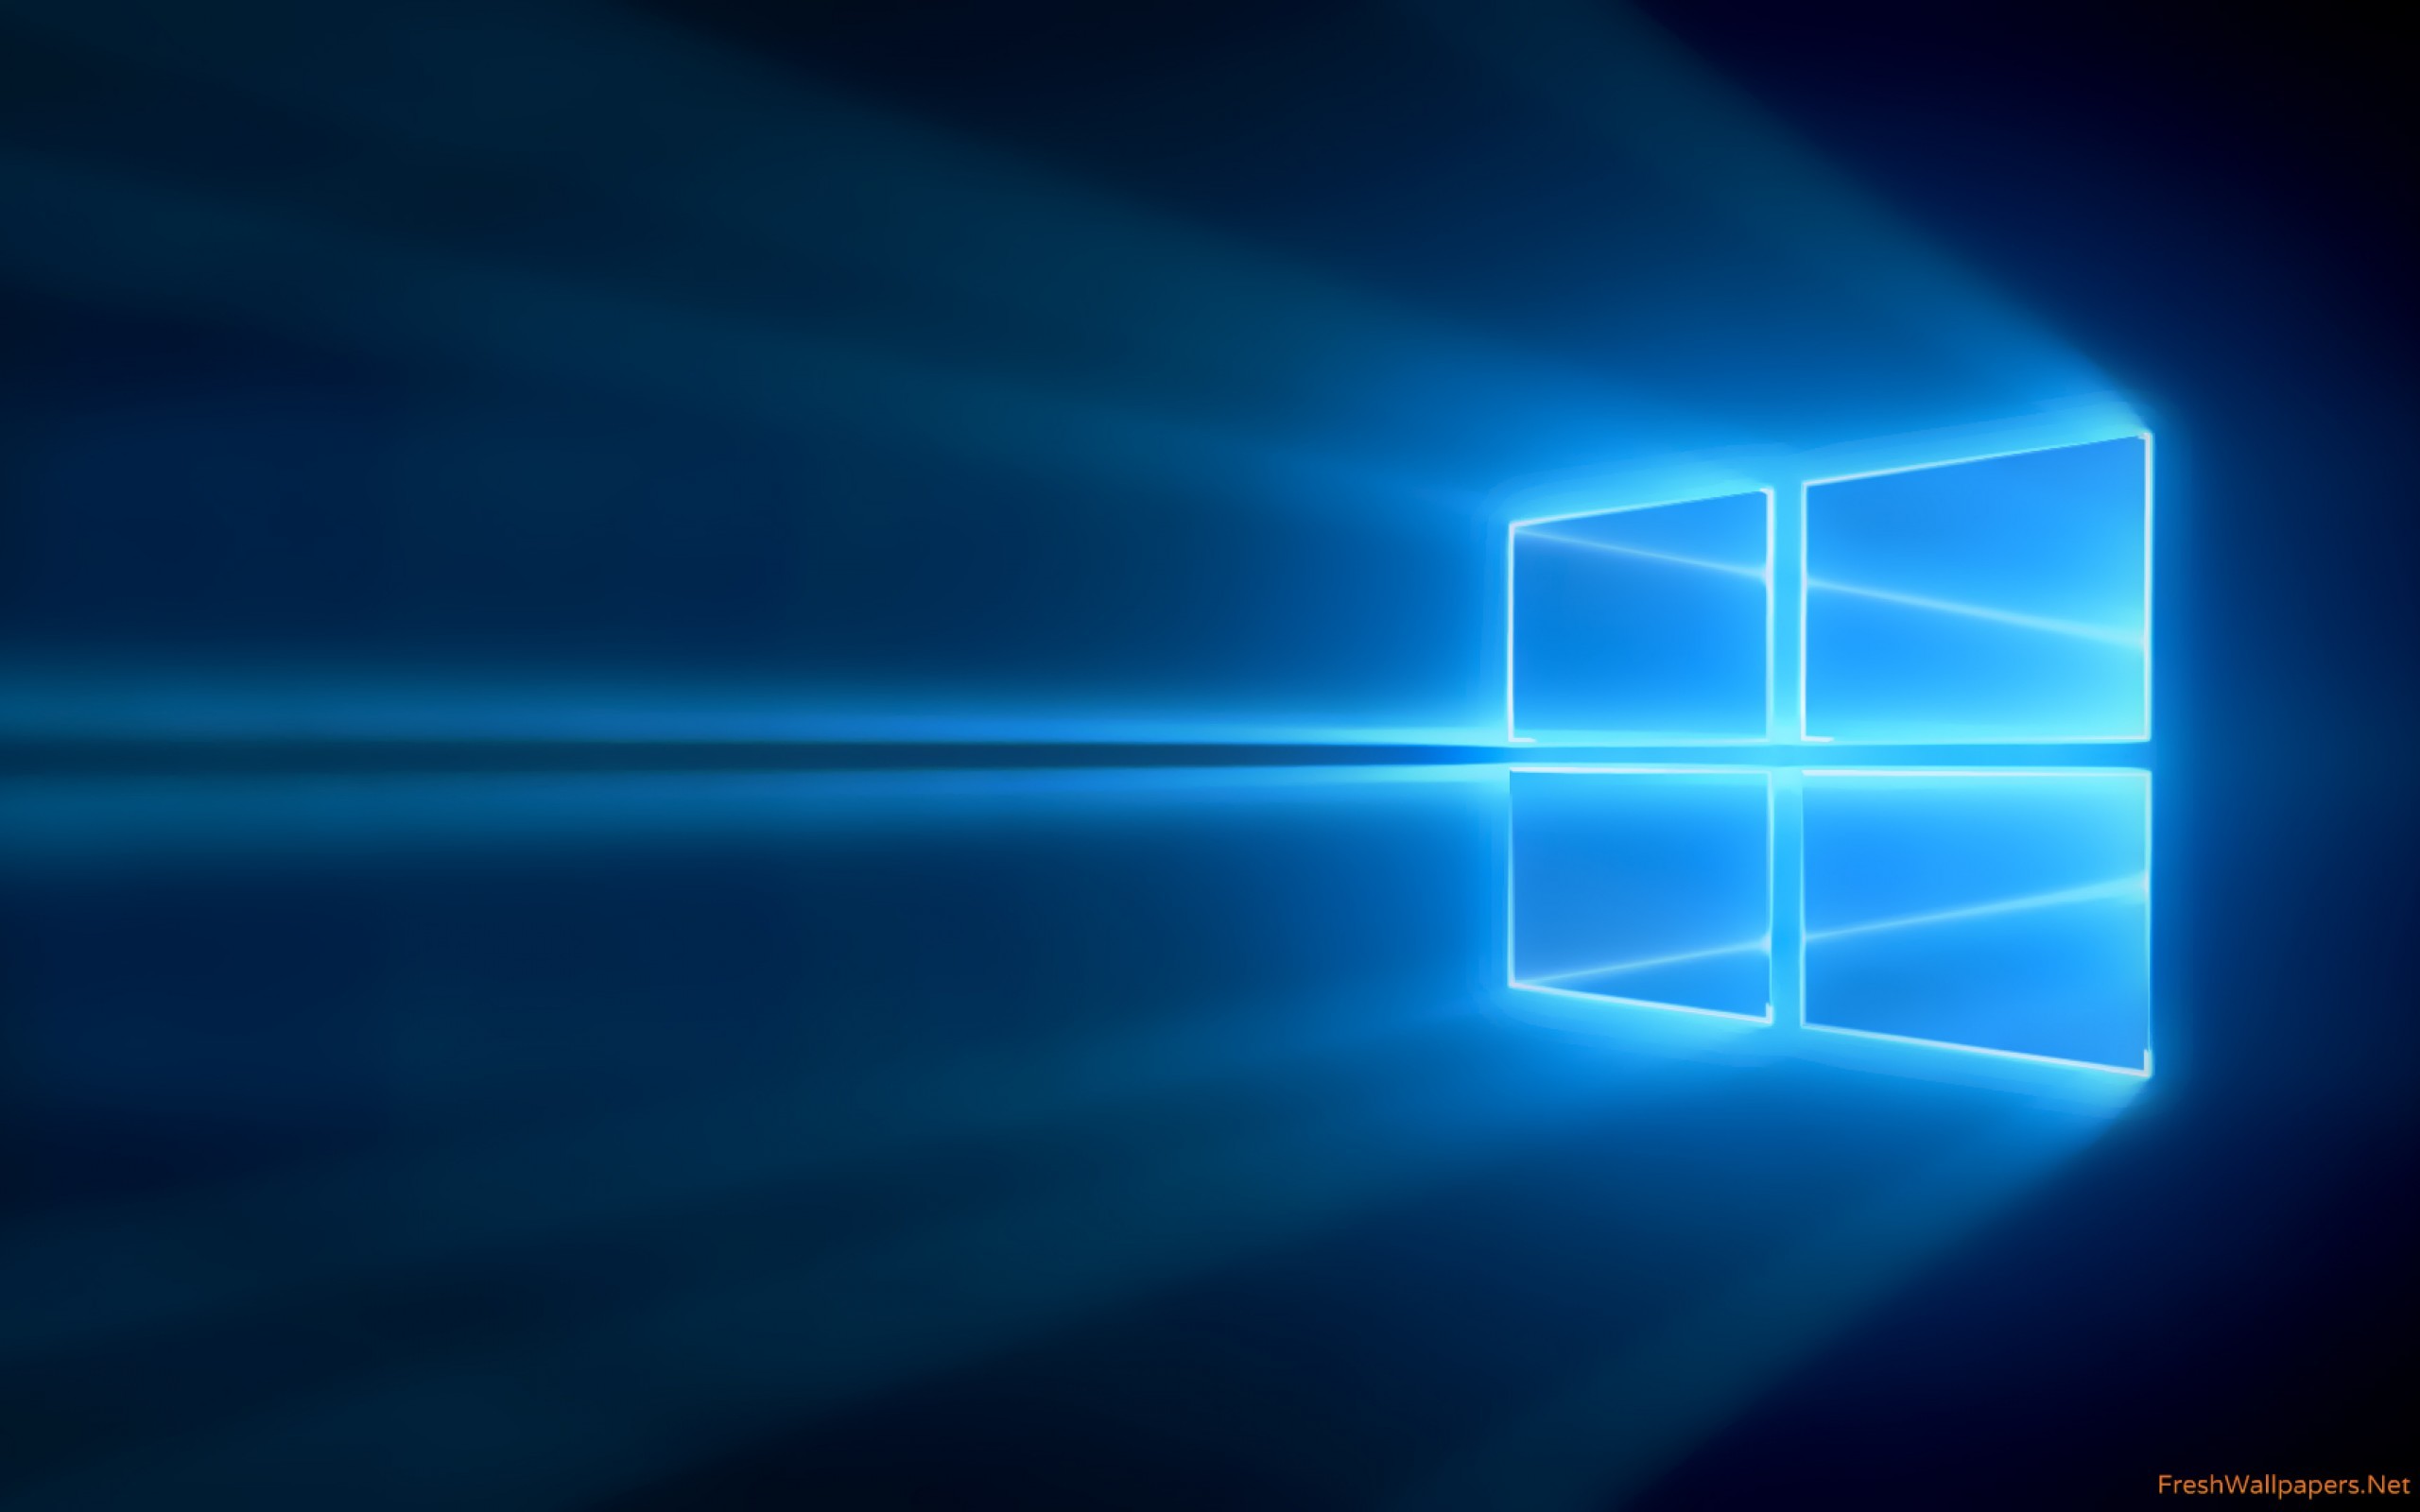 2560x1600 23 of the Best Windows 10 Wallpaper Backgrounds